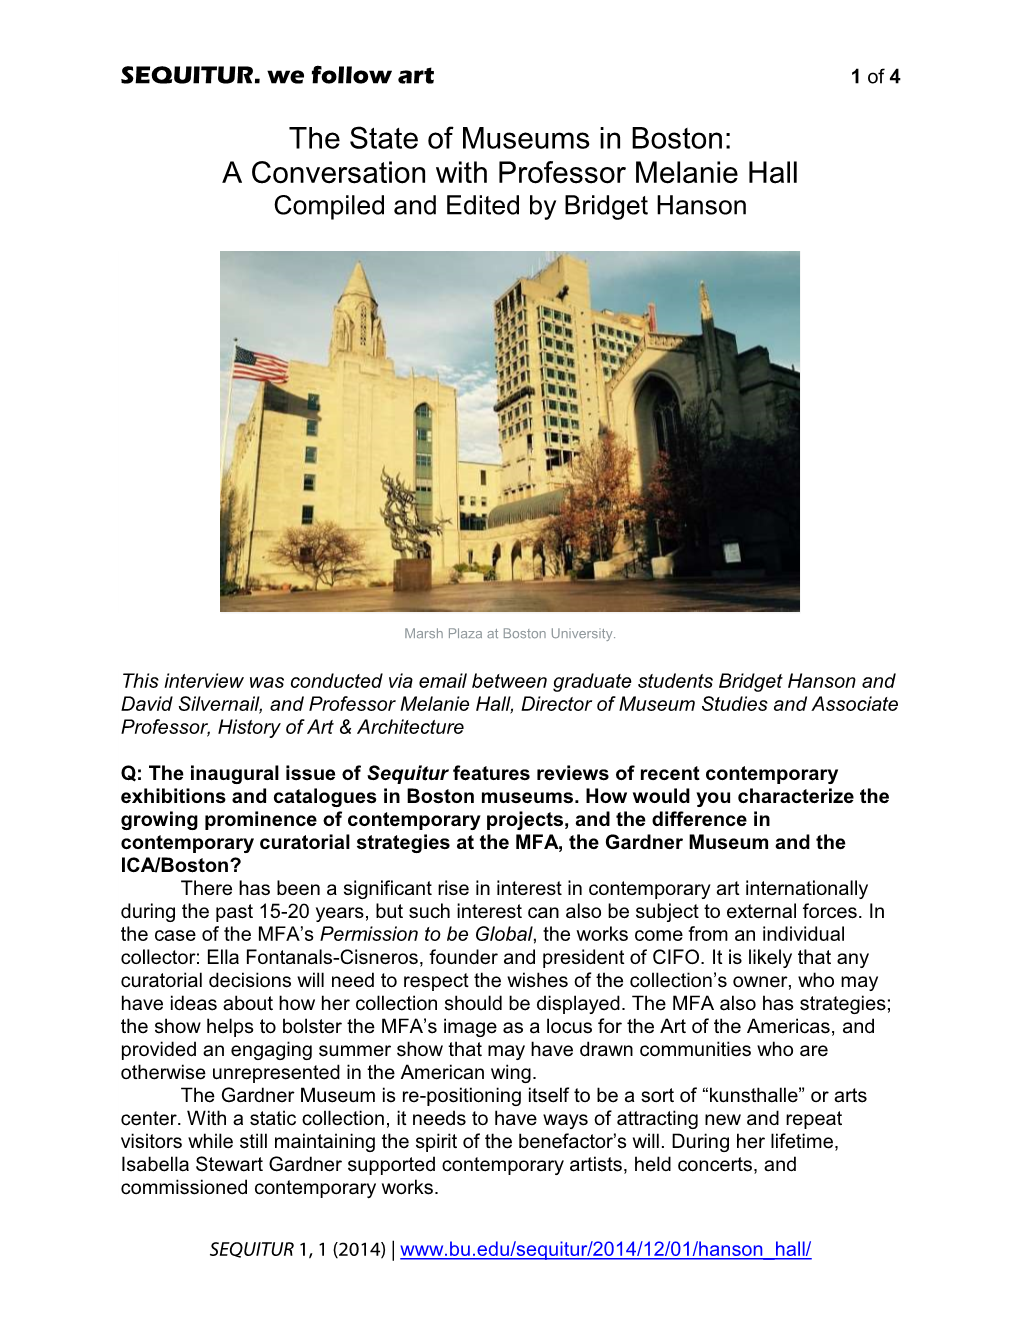 A Conversation with Professor Melanie Hall Compiled and Edited by Bridget Hanson